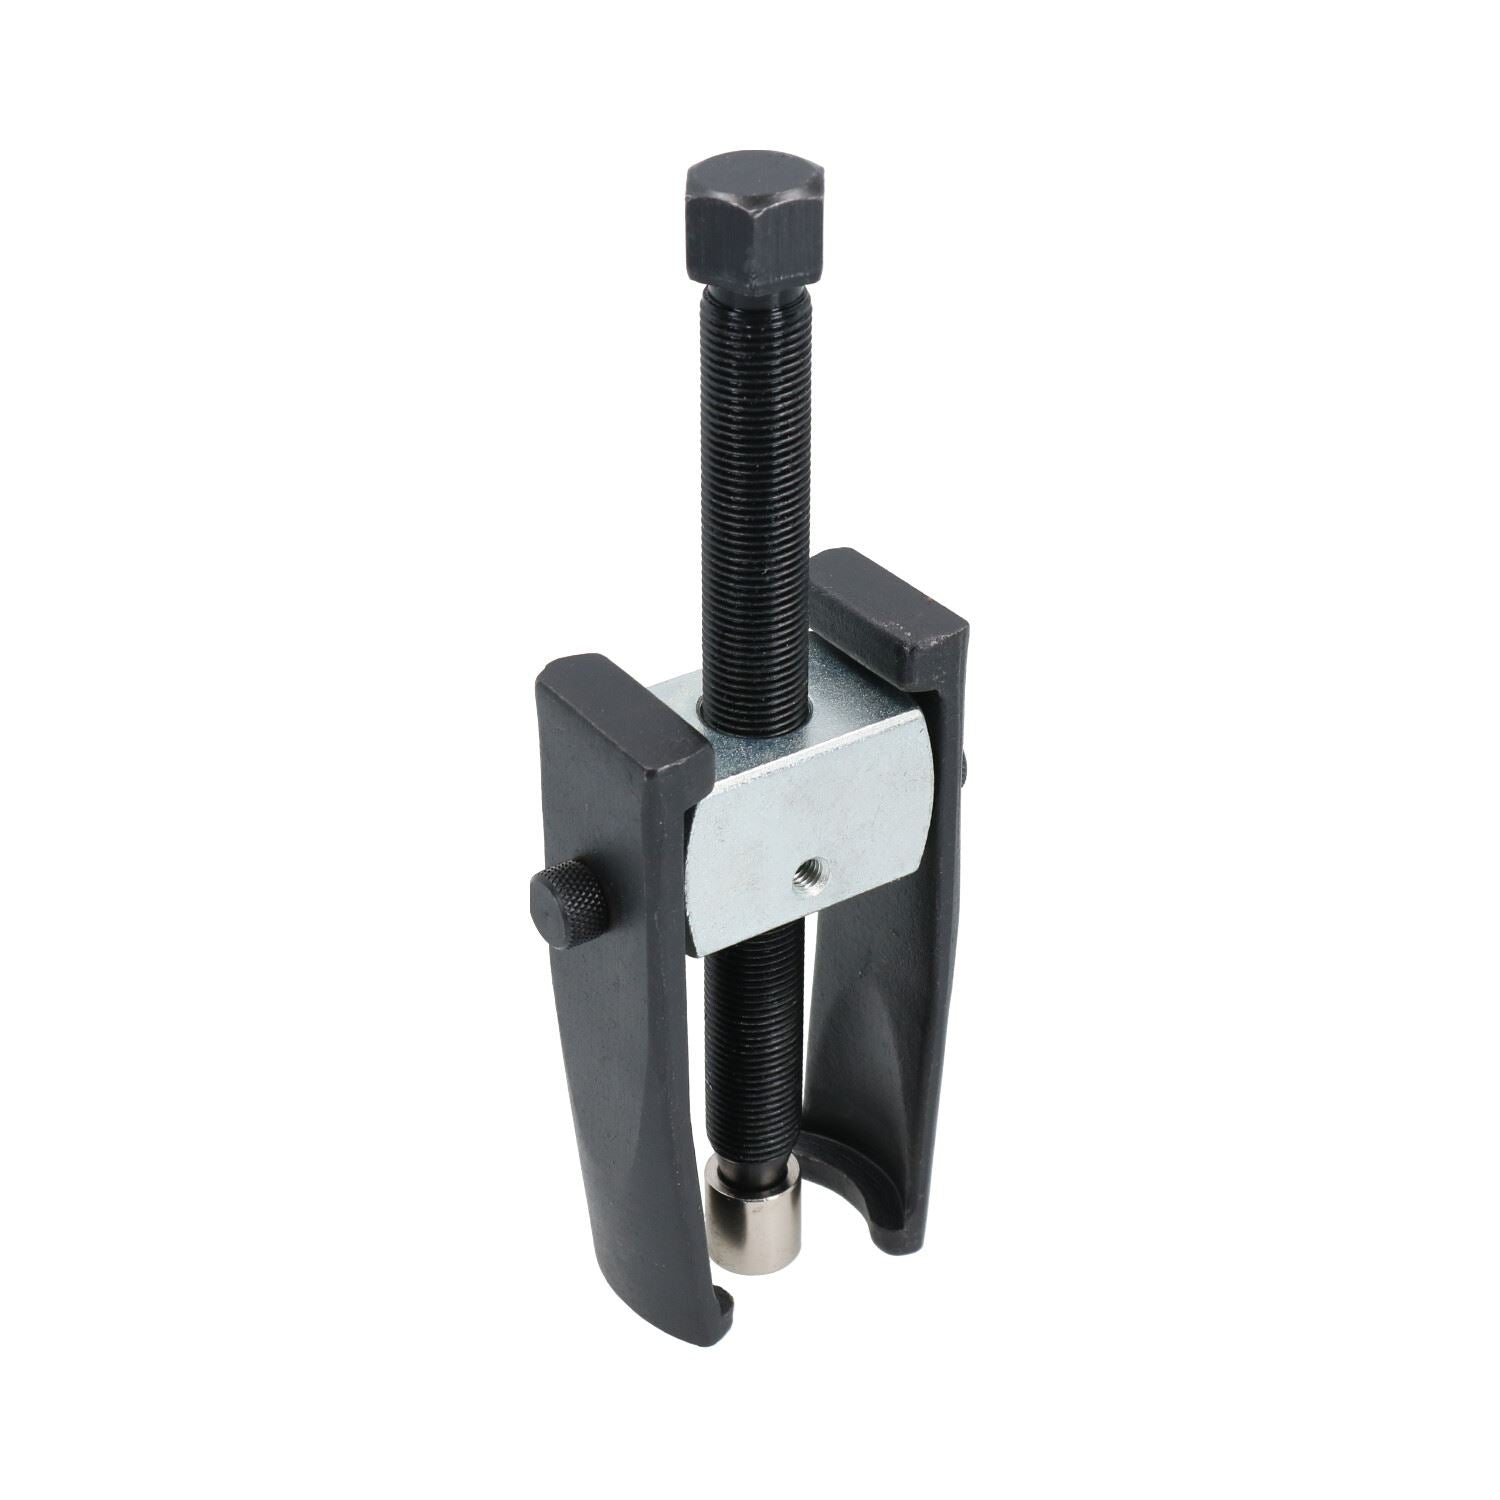 Pulley Puller with Adjustable Jaw Tension for Alternators + Power Steering Pumps